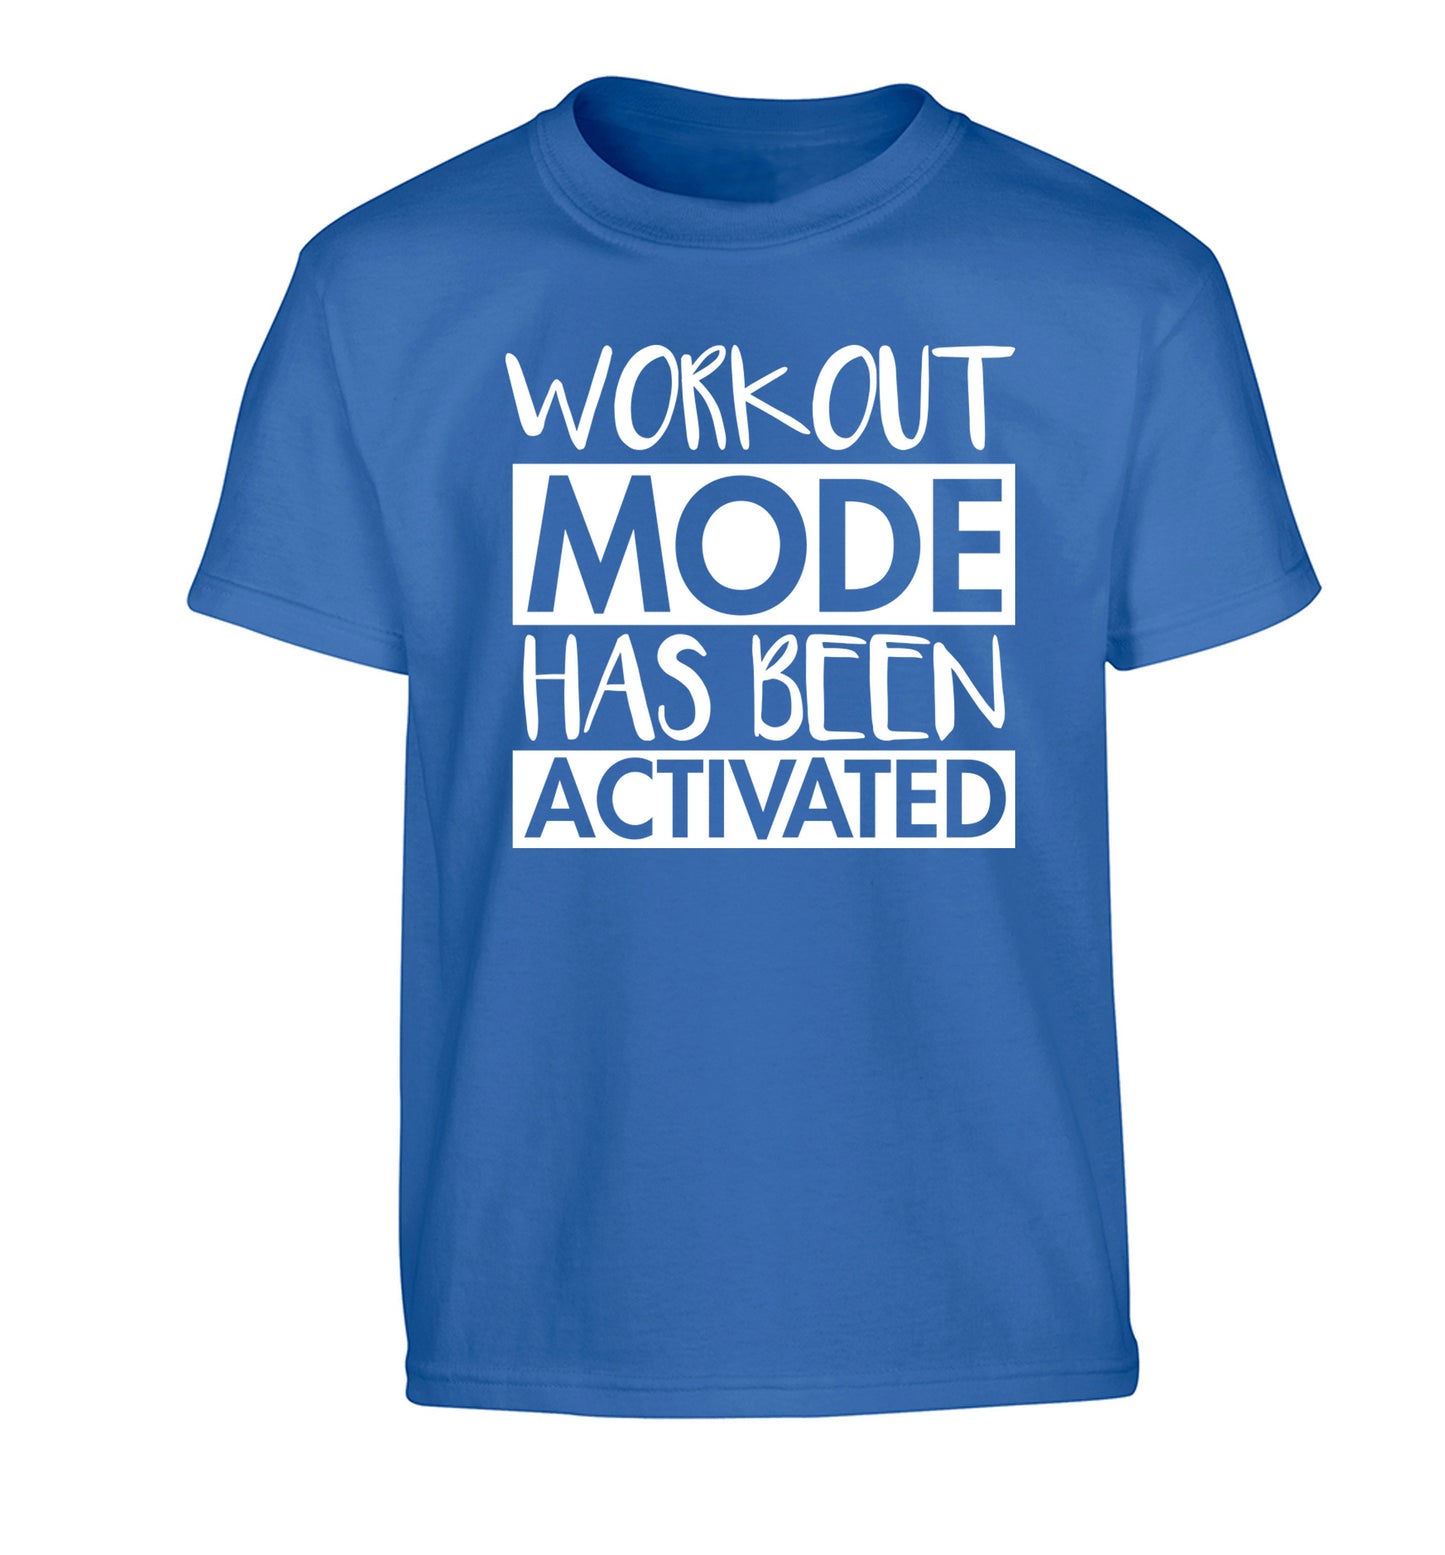 Workout mode has been activated Children's blue Tshirt 12-14 Years